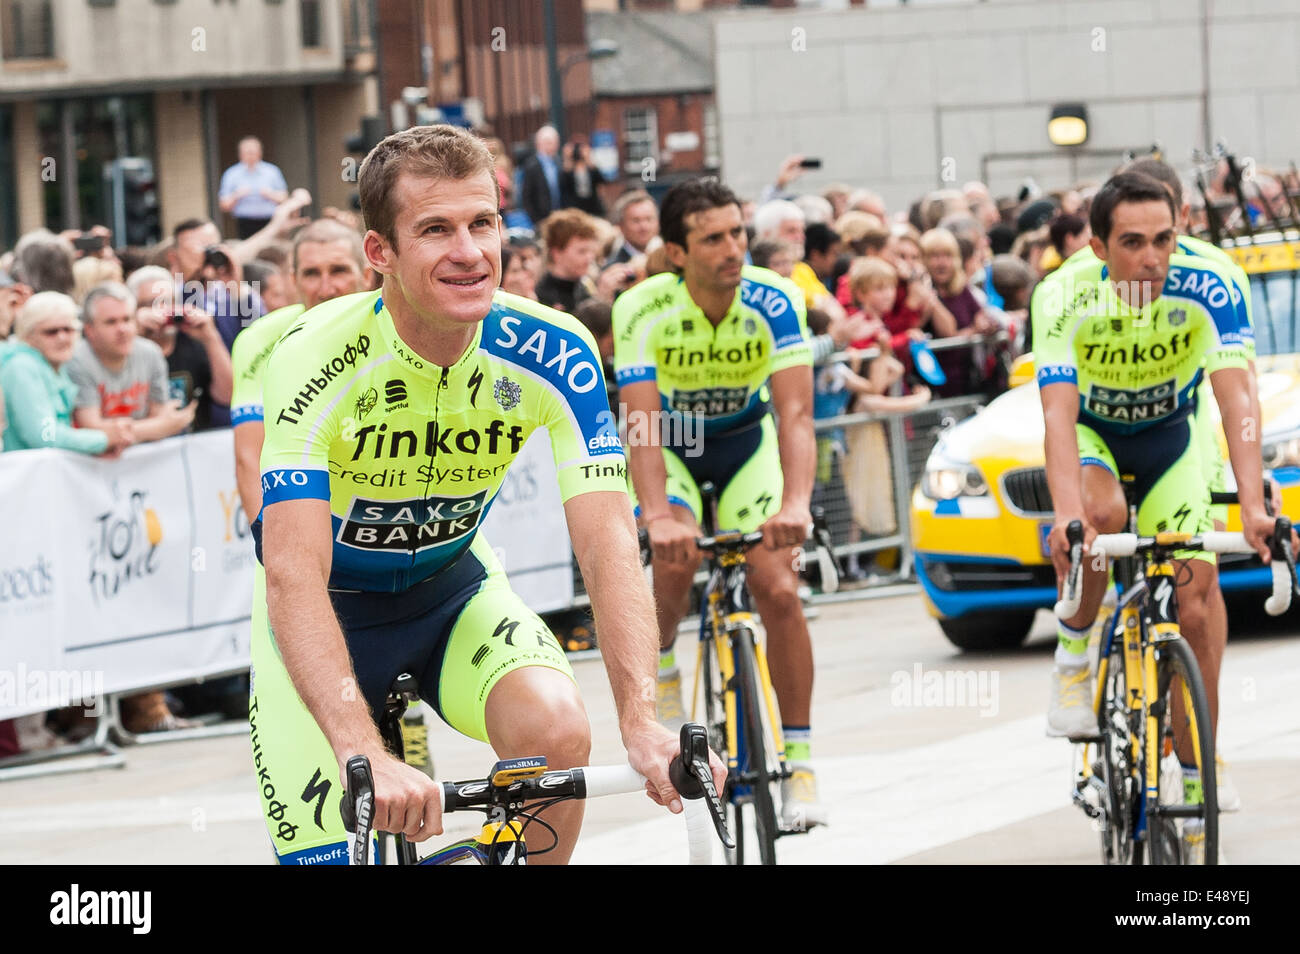 tinkoff cycling